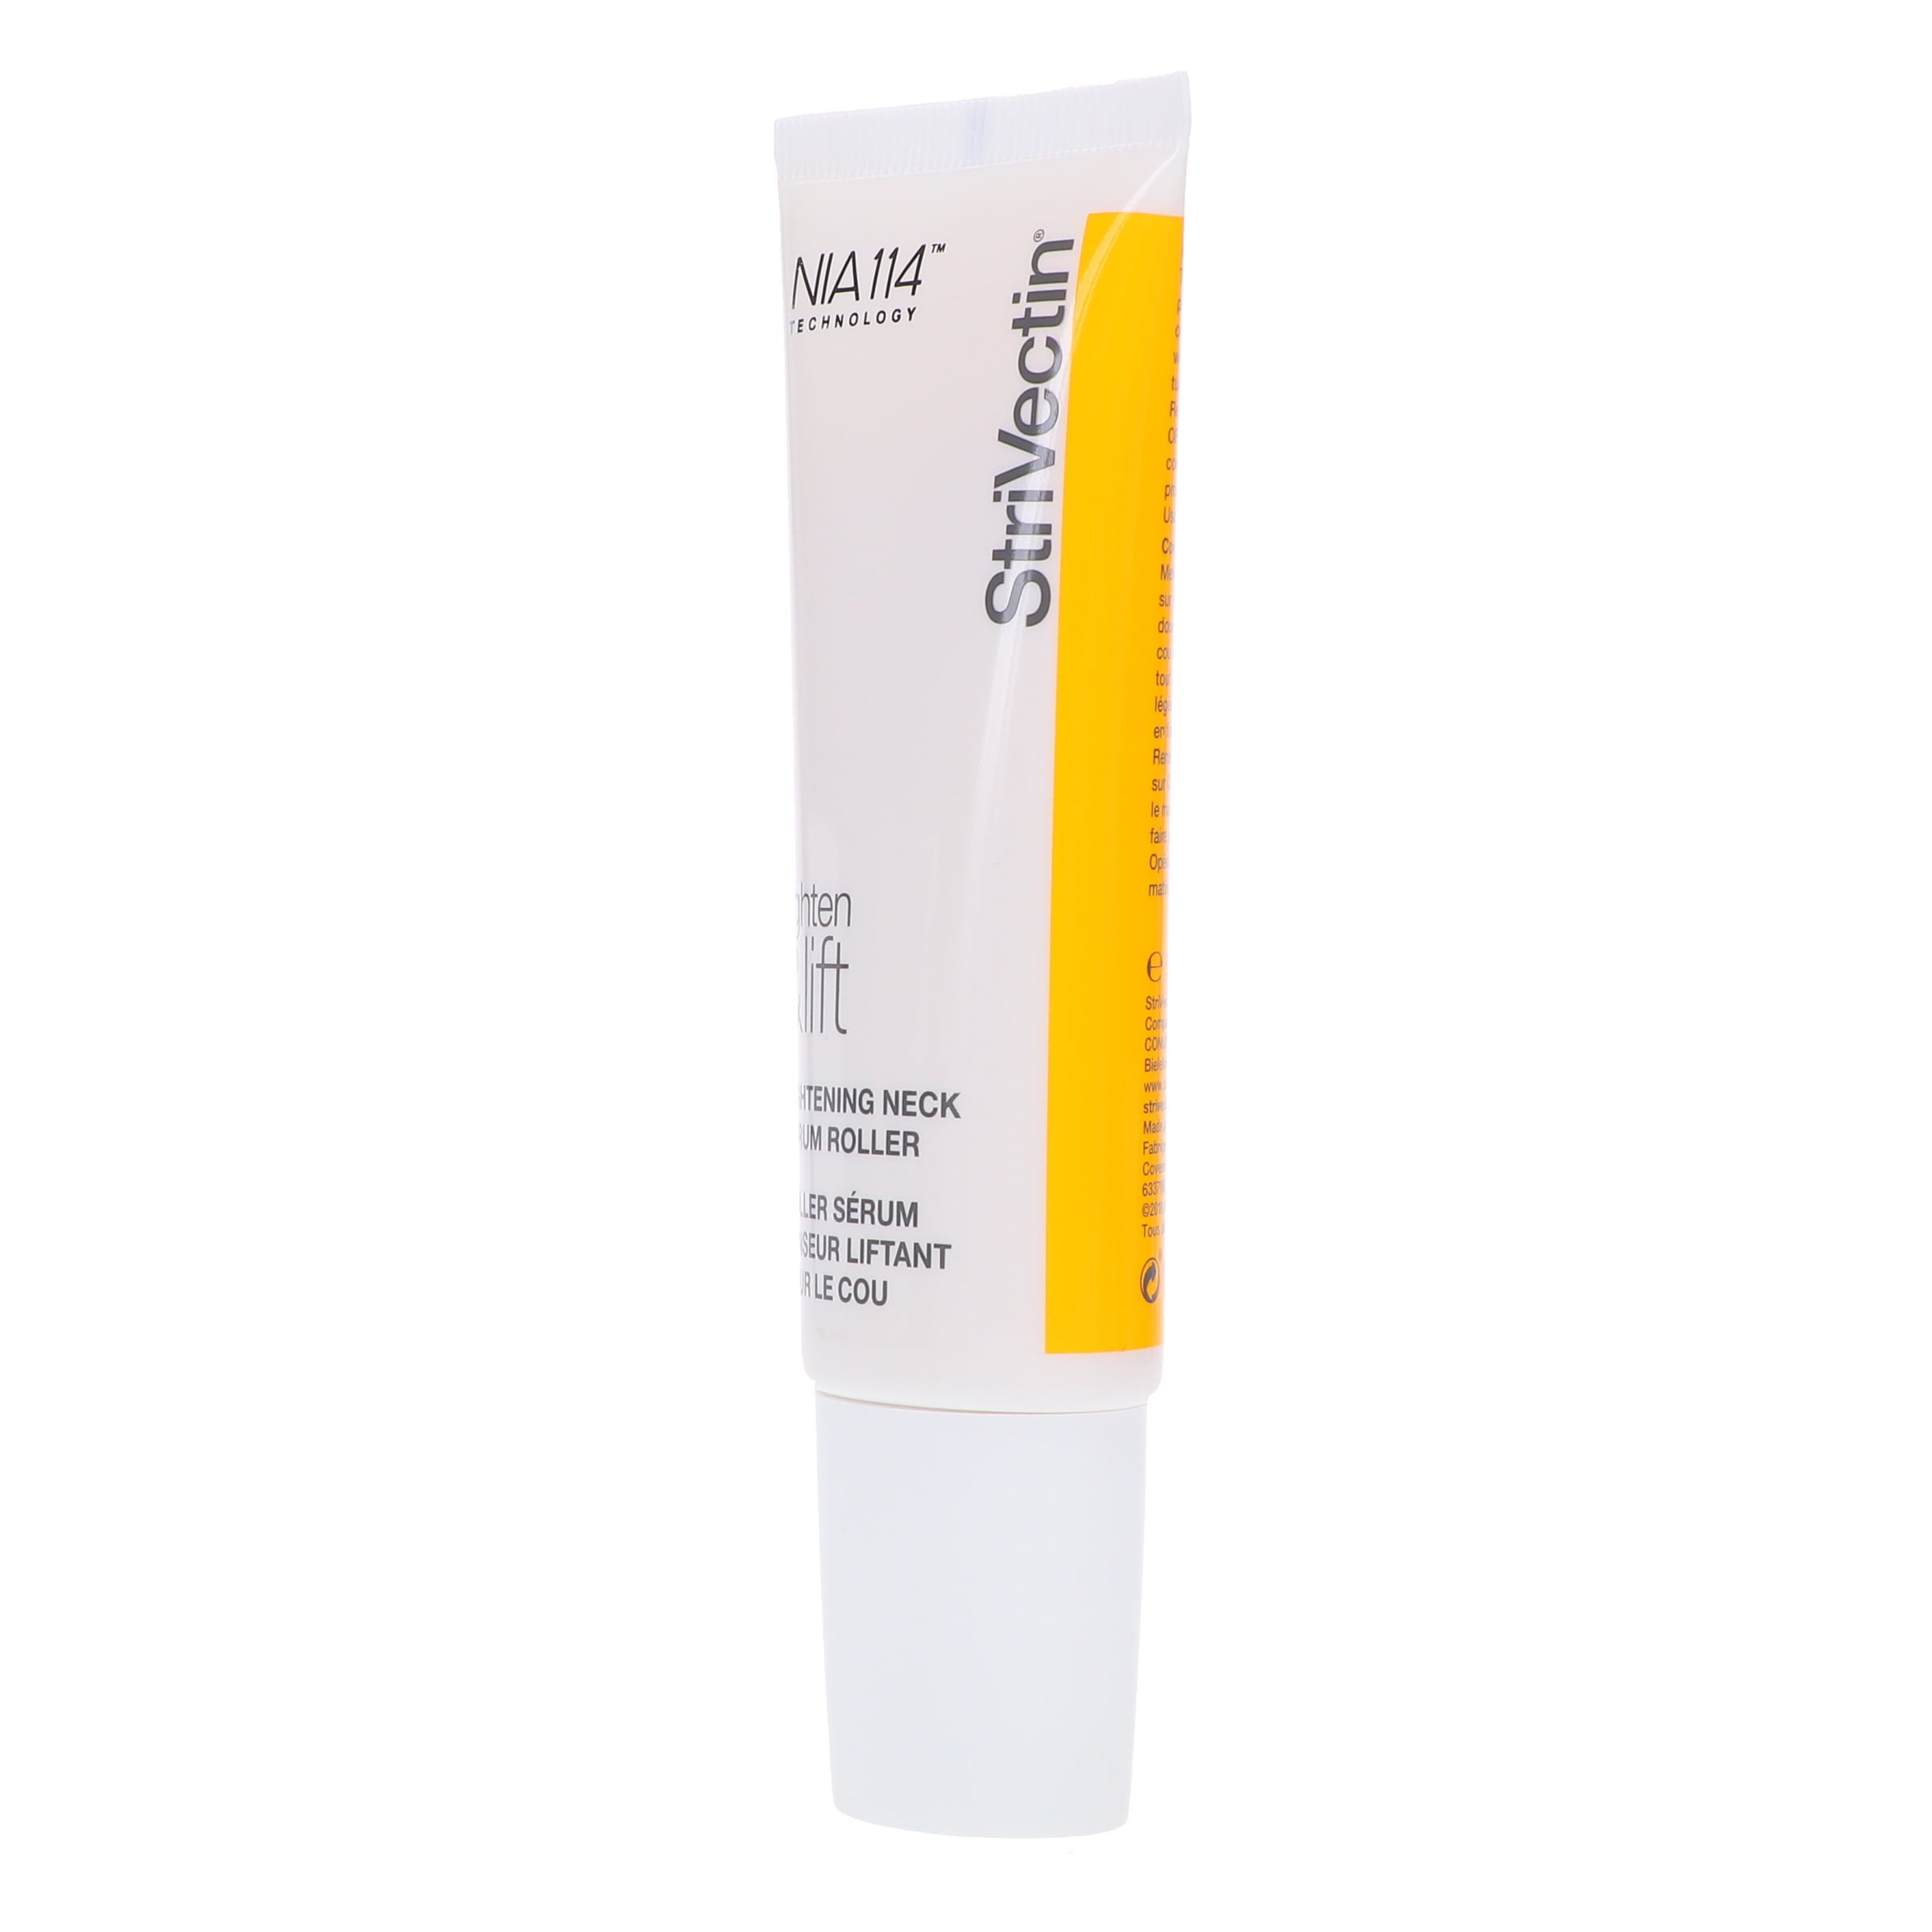 Why Don't You Buy… StriVectin's Line-Smoothing Neck Serum Roller?